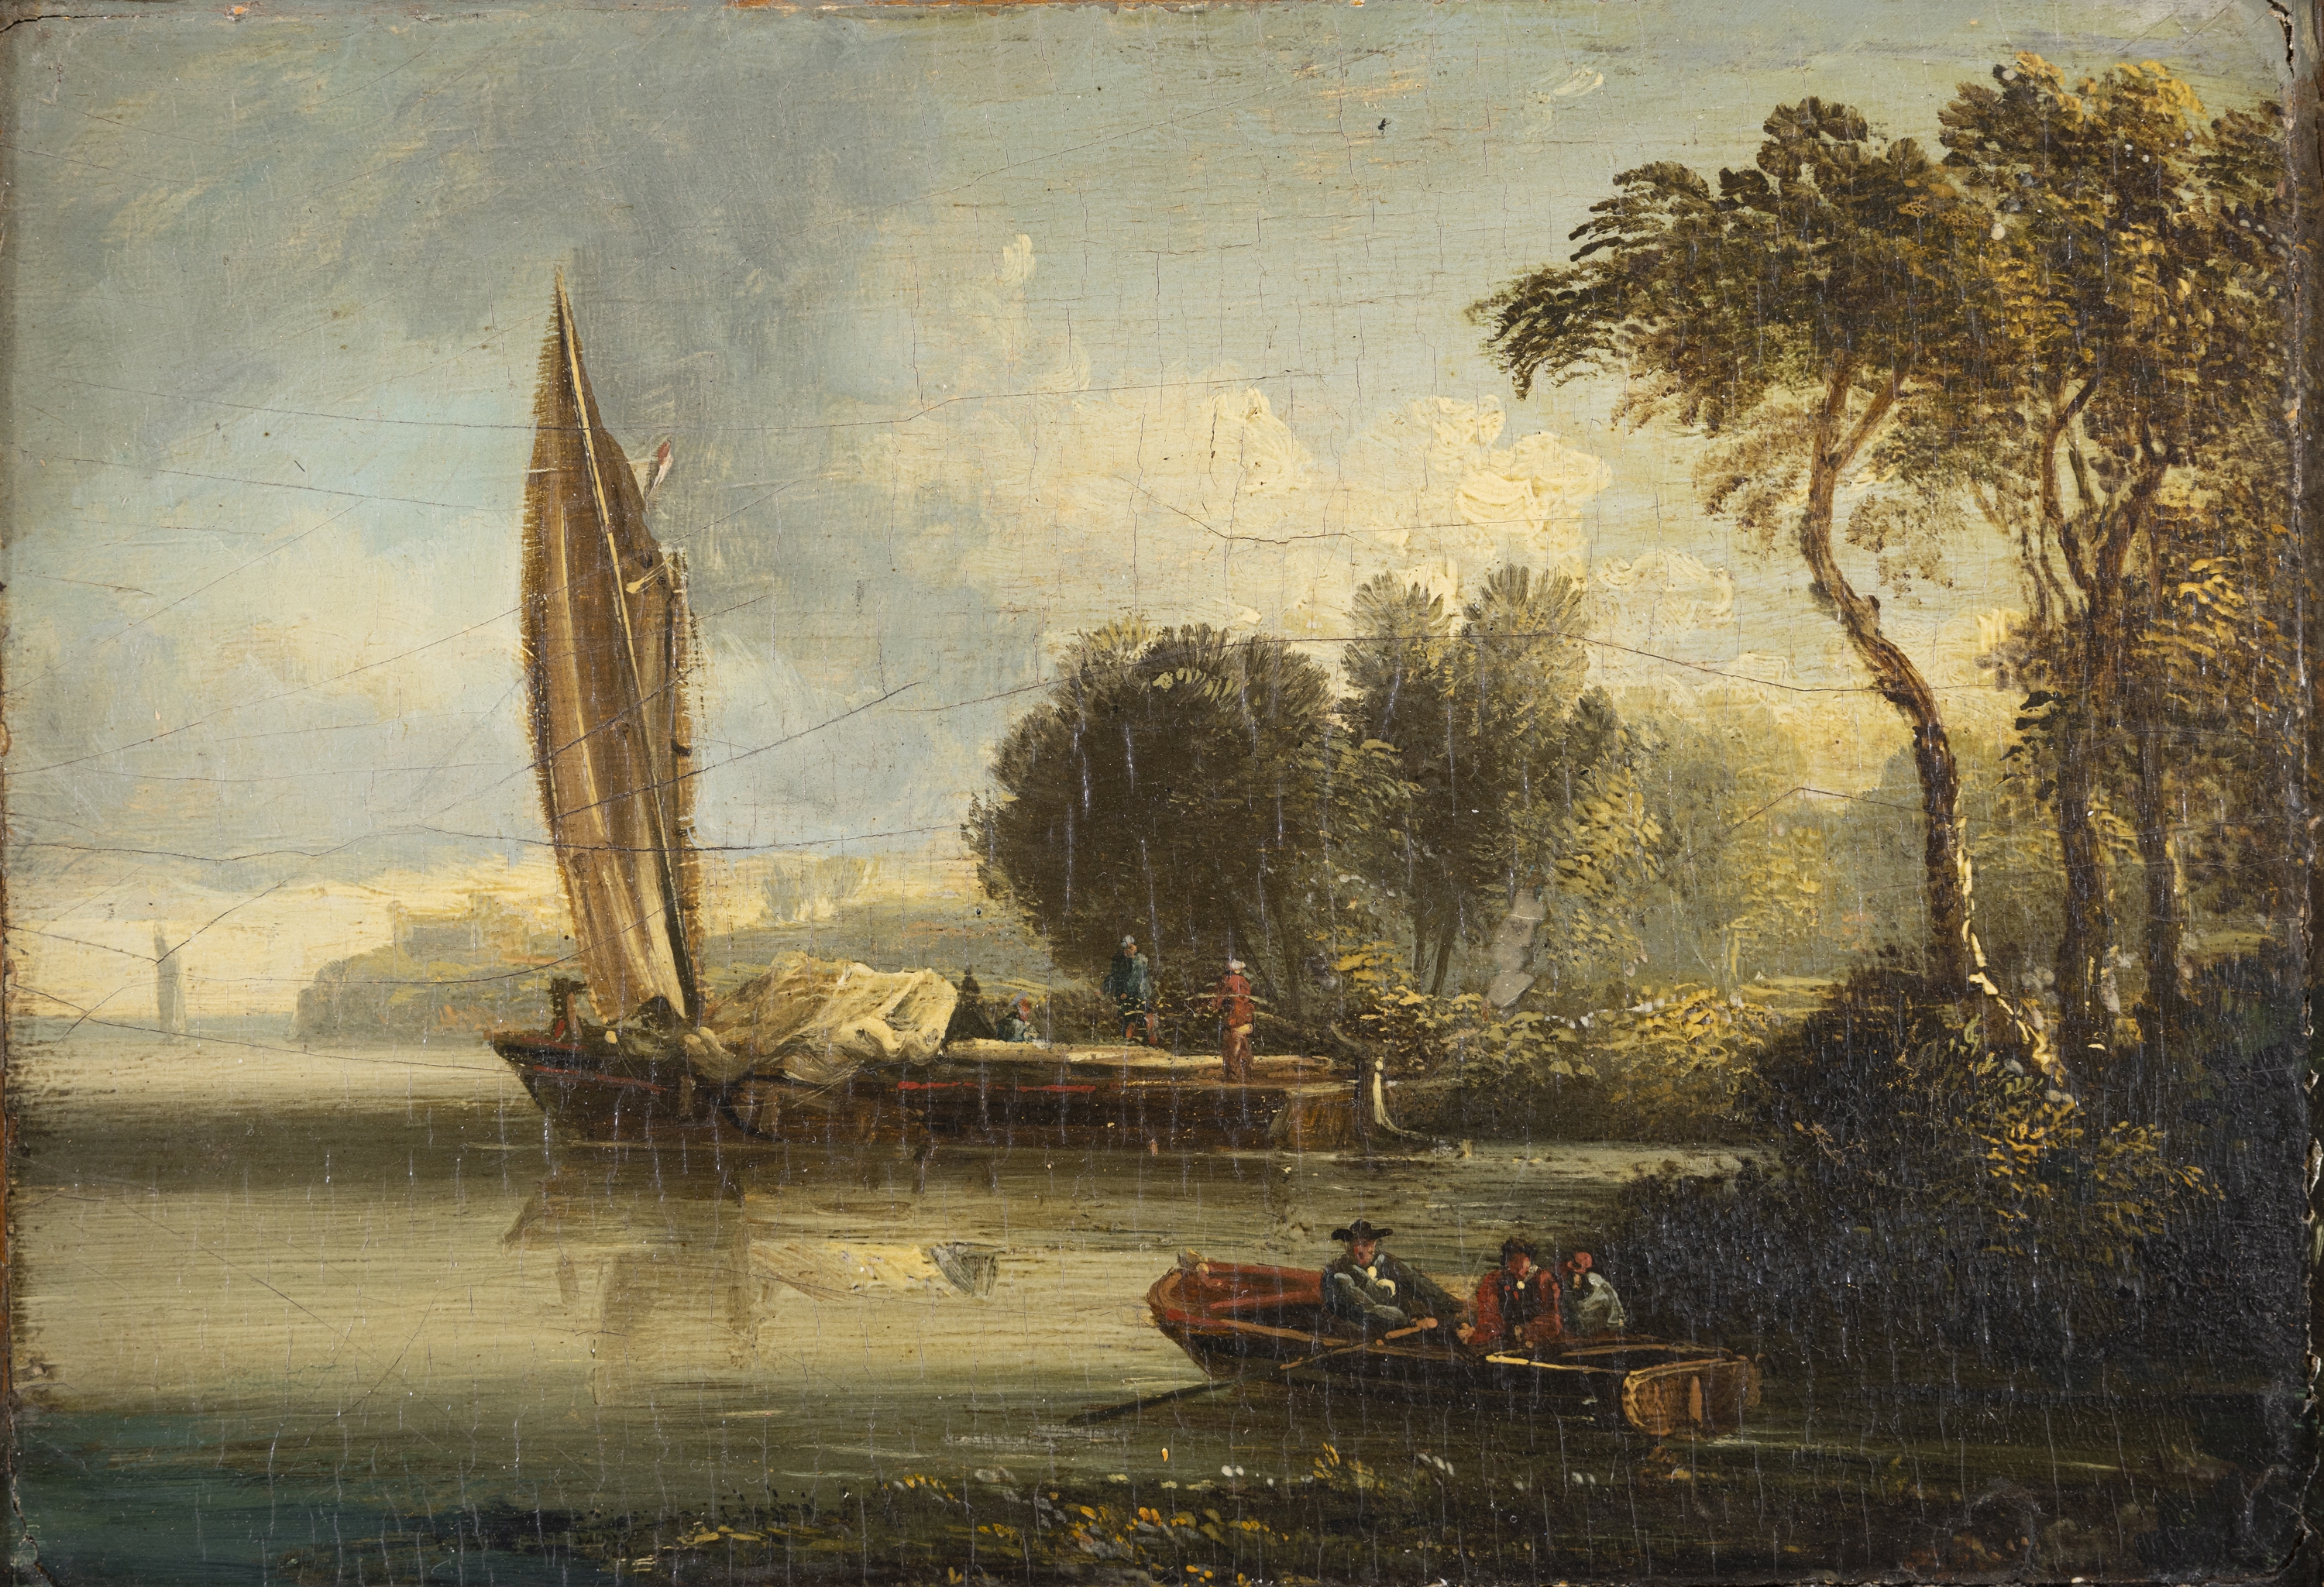 Figures in a Rowing Boat by the Shore by William Sadler